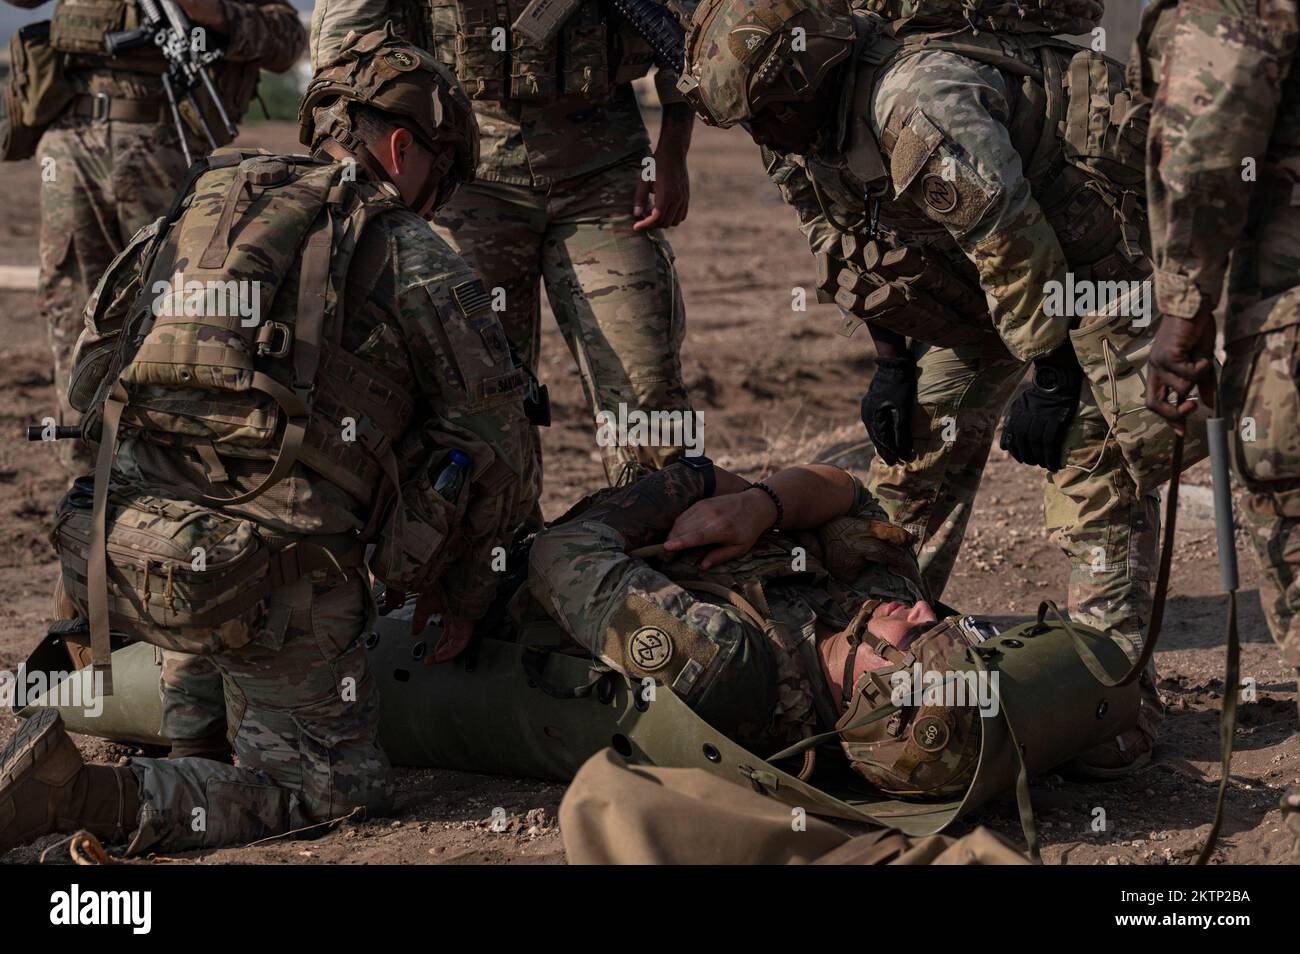 U.S. Army infantrymen assigned to the East Africa Response Force (EARF) position a simulated injured soldier on a litter at Camp Lemonnier, Djibouti, Nov. 17, 2022, during platoon and squad movement training. The EARF serves as part of U.S. Africa Command's crisis response capability, and is tasked with responding to emergency situations at U.S. Embassies in the East African region or in countries around the Combined Joint Task Force - Horn of Africa  area of interest. (U.S. Air Force photo by Senior Airman Bryan Guthrie) Stock Photo